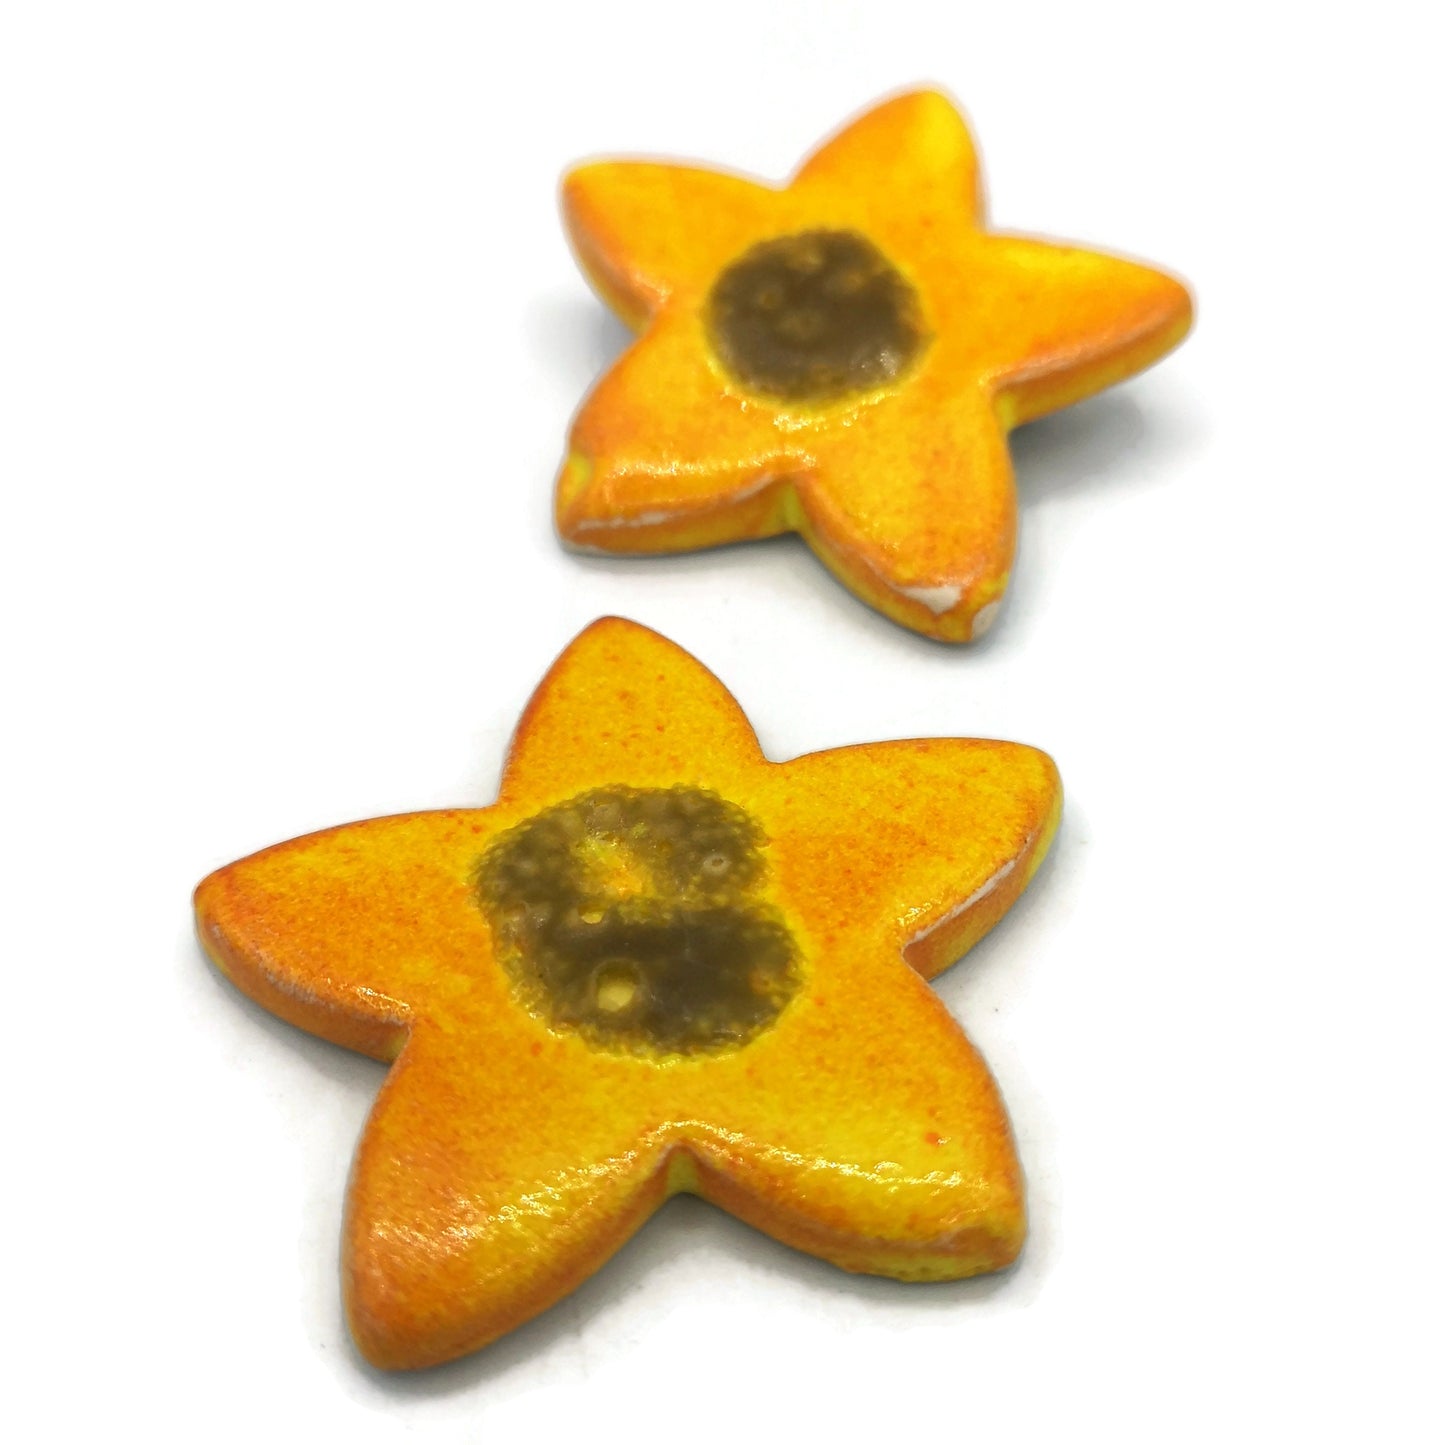 Yellow Sunflower Pin For Women, Handmade Ceramic Scarf Brooch, Best Sellers Mothers Day Gift For Grandma, Artisan Clay Jewelry Ready To Ship - Ceramica Ana Rafael